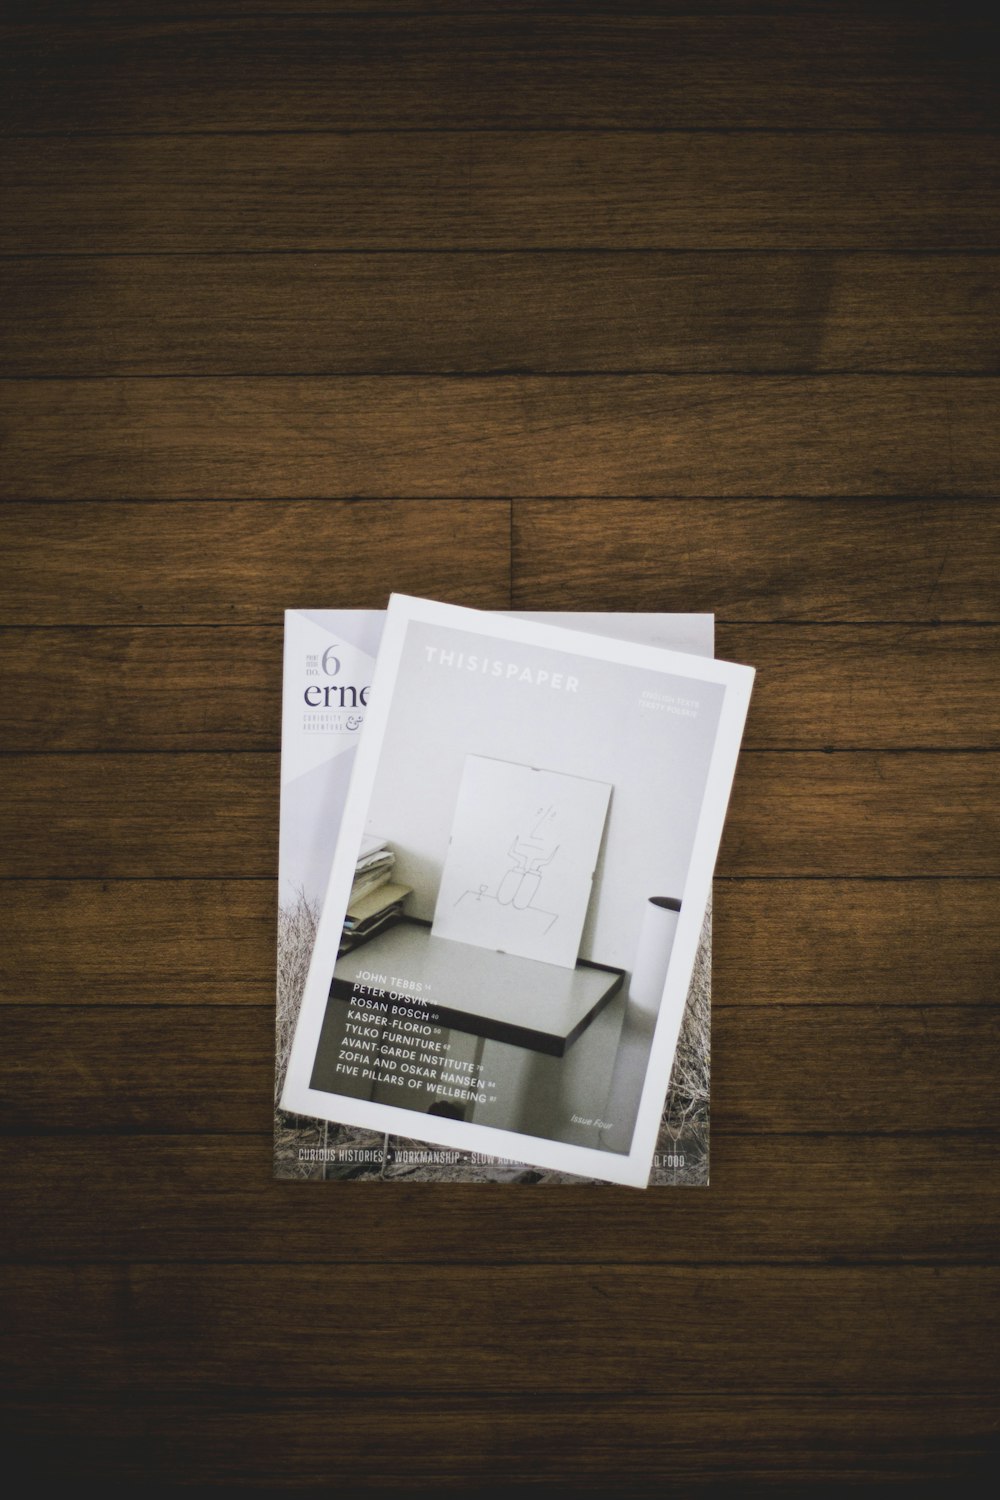 Old Magazines Pictures  Download Free Images on Unsplash